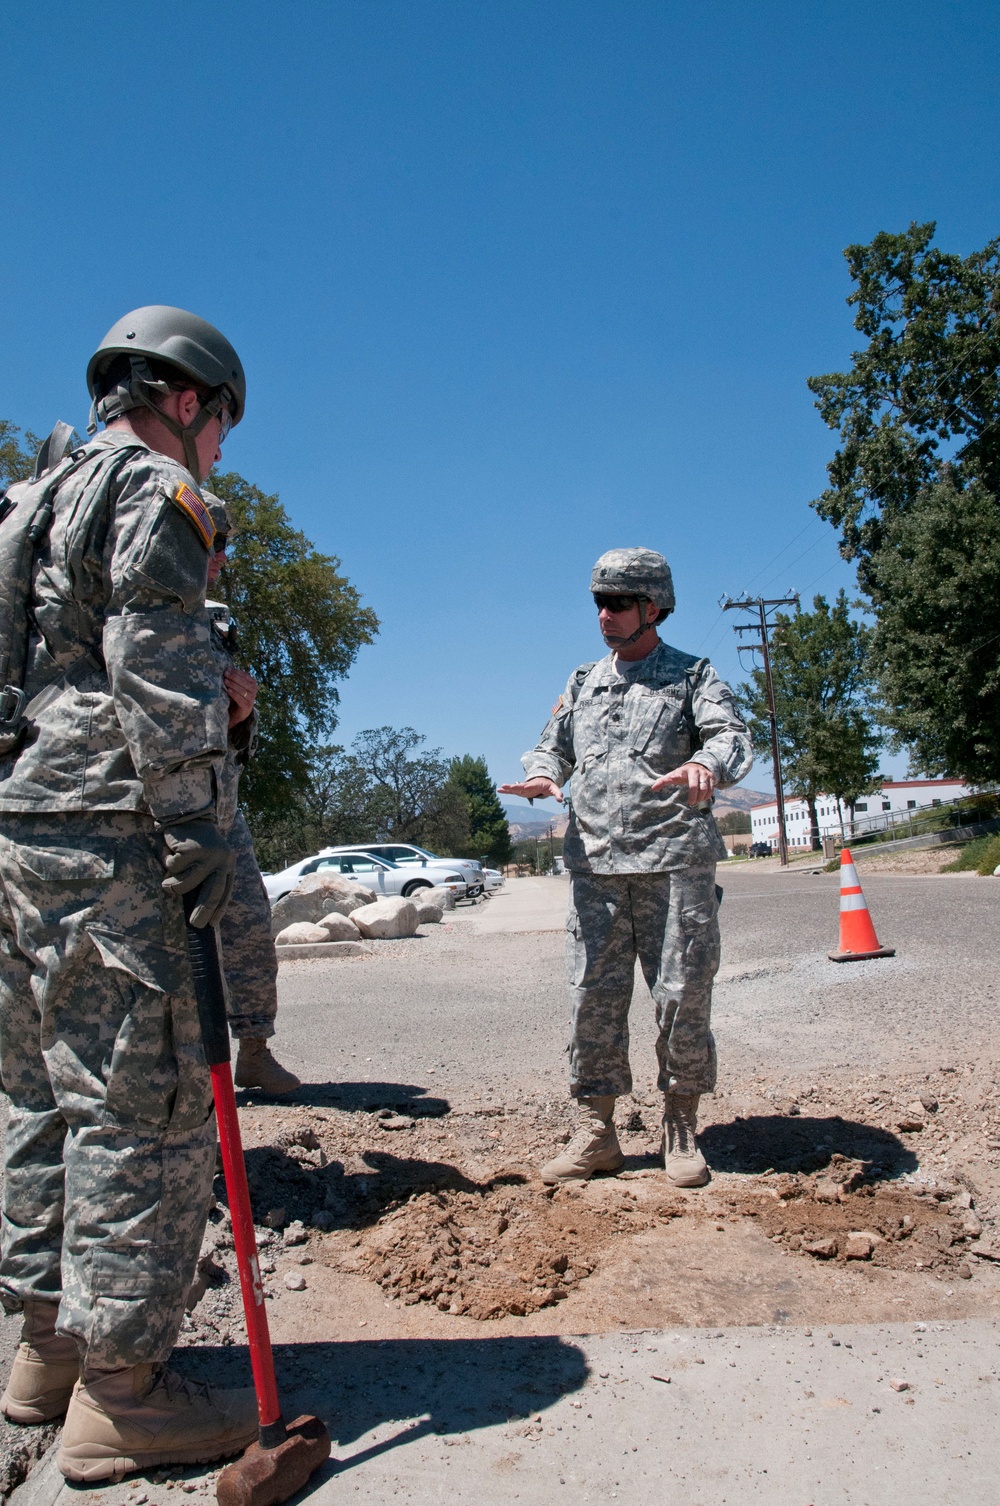 854th Engineer Battalion strives to provide professional products